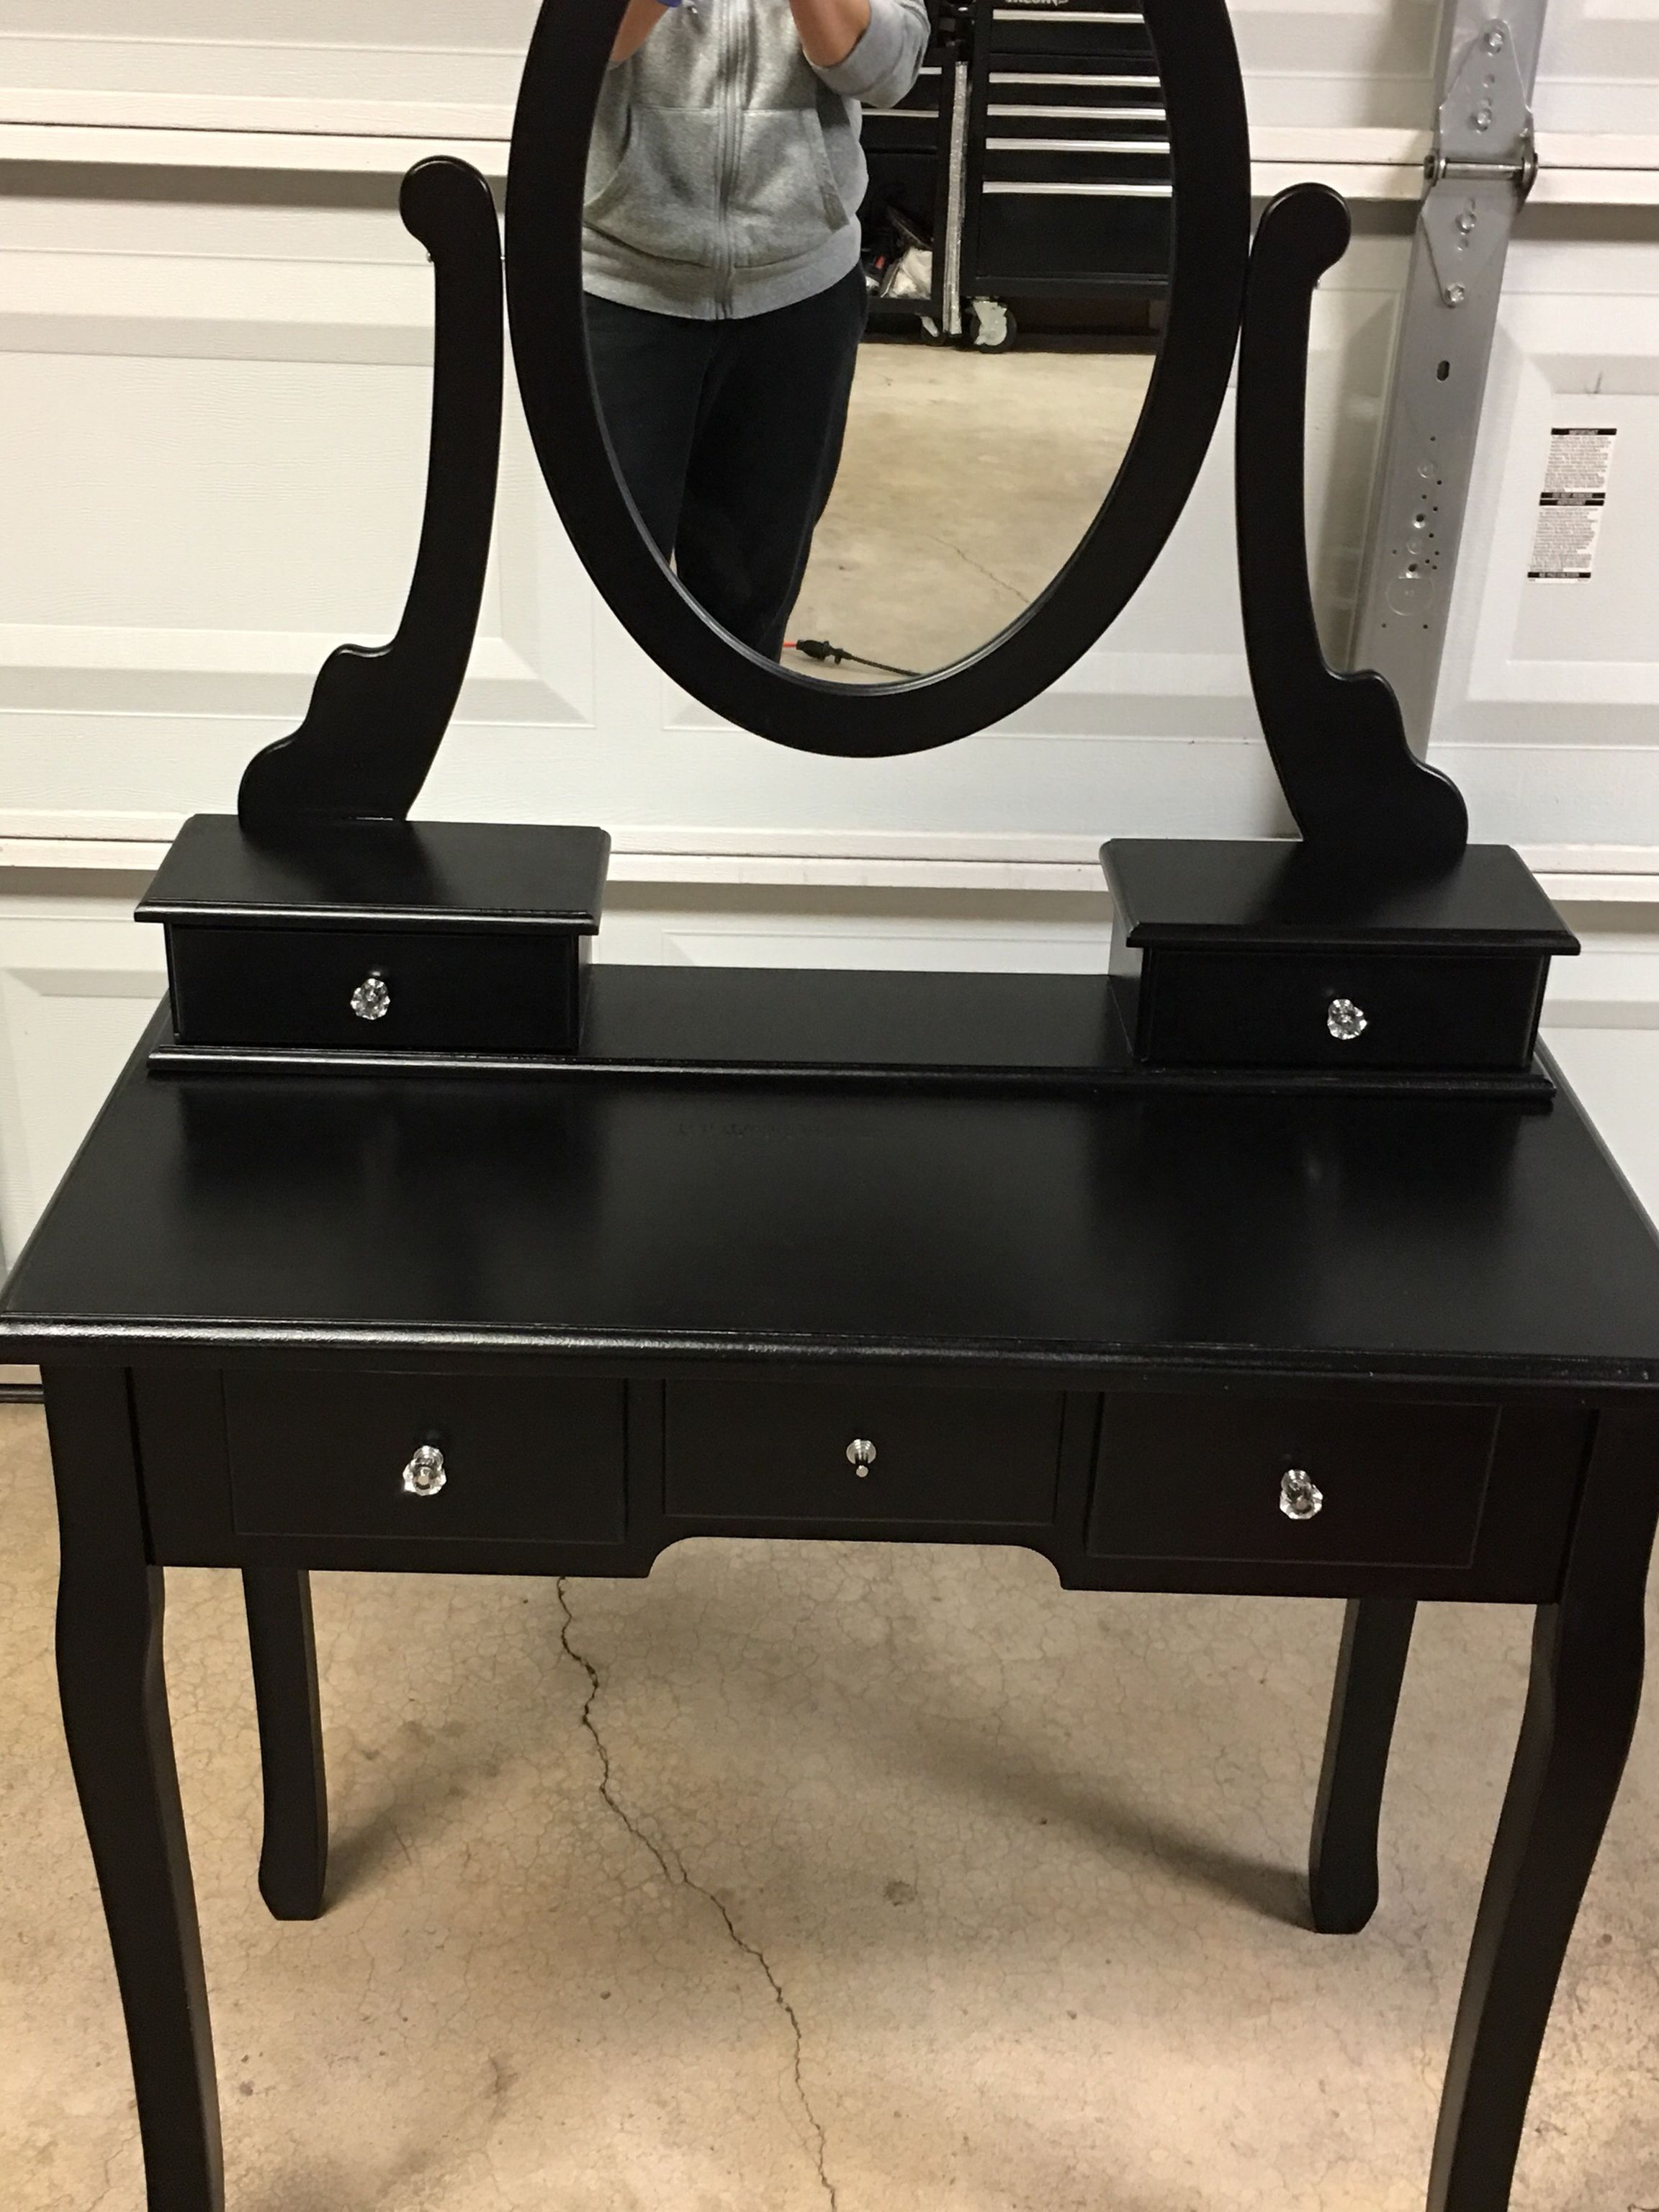 Used vanity makeup with stool,the stoil have a small makeup Stain